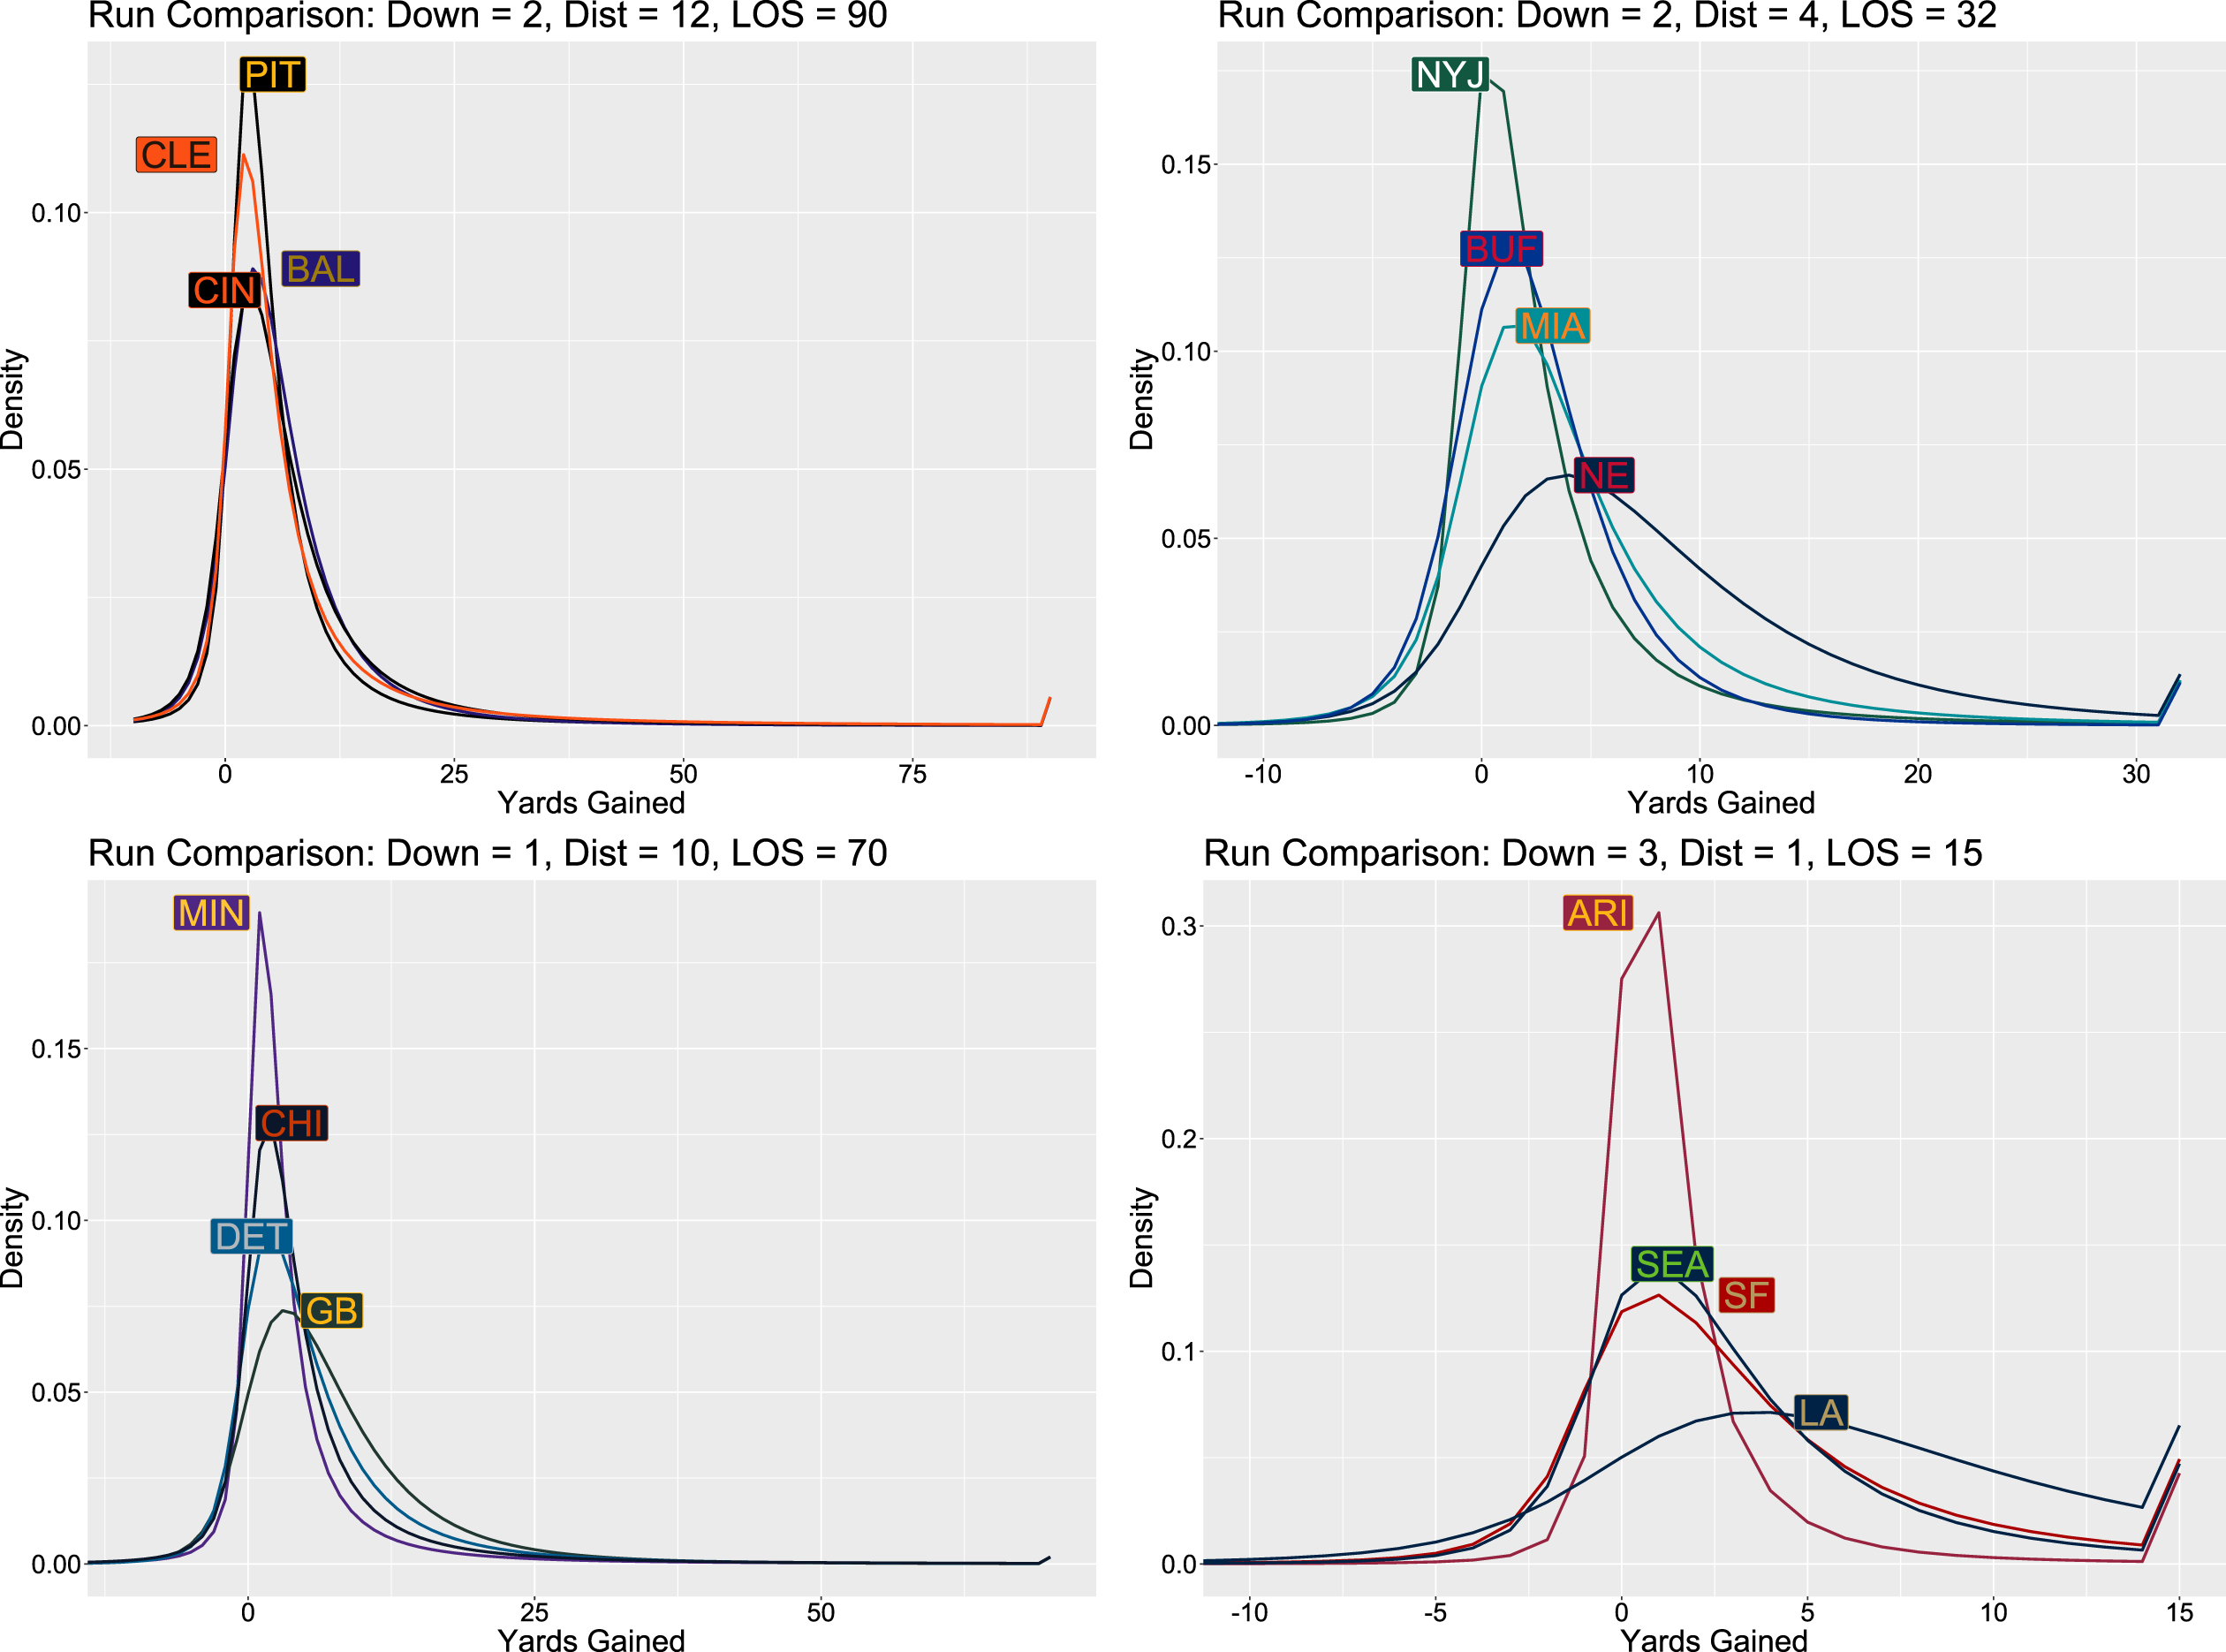 Comparison plots showing differences in predictive run distributions for different teams for a common state. Colors provided via R’s teamcolors package (Baumer and Matthews, 2020).